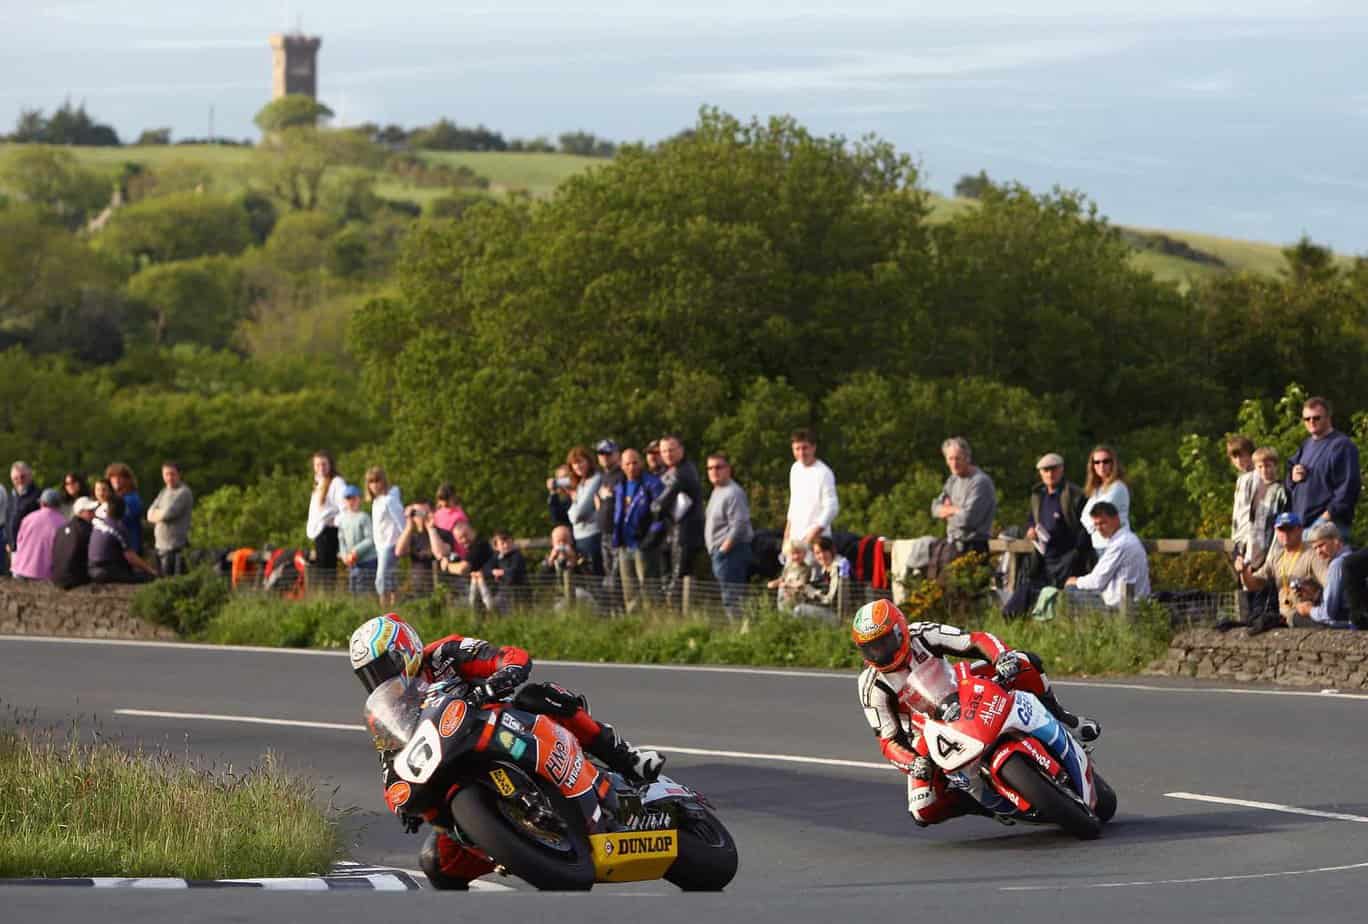 Isle of Man Motorcycle Race: A Thrilling and Dangerous Adventure